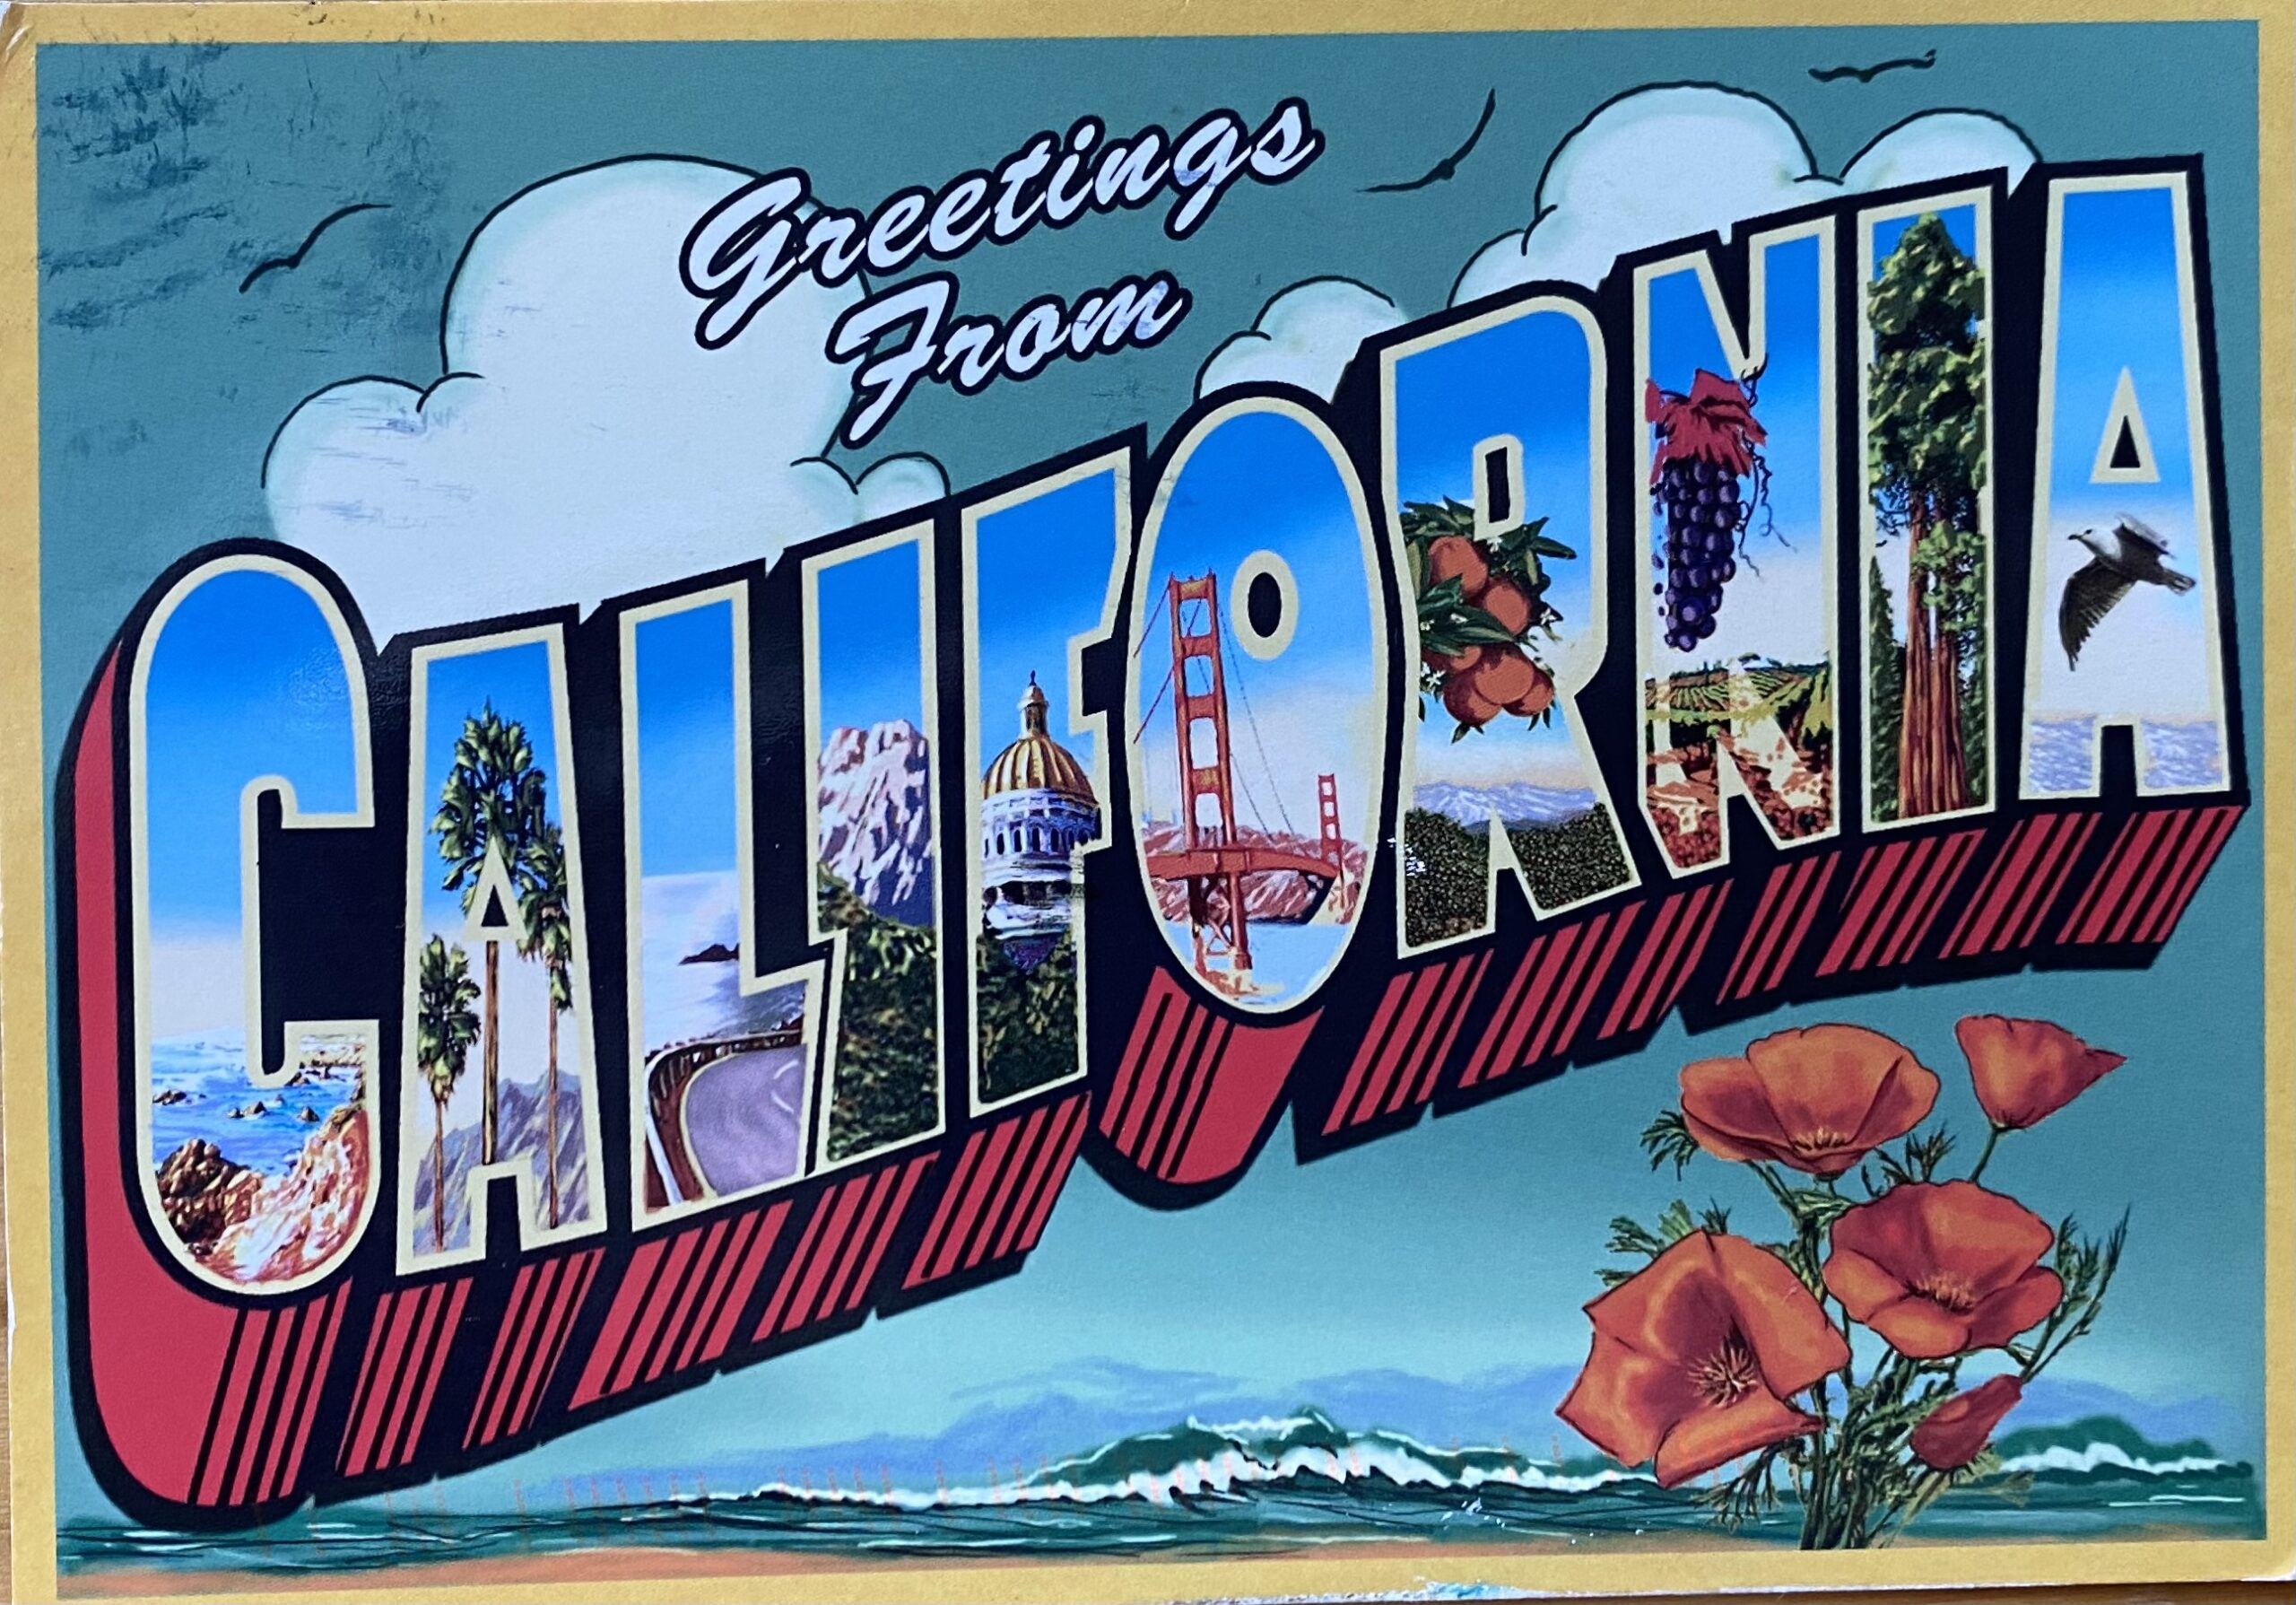 Postcard from California, received August 10 2022